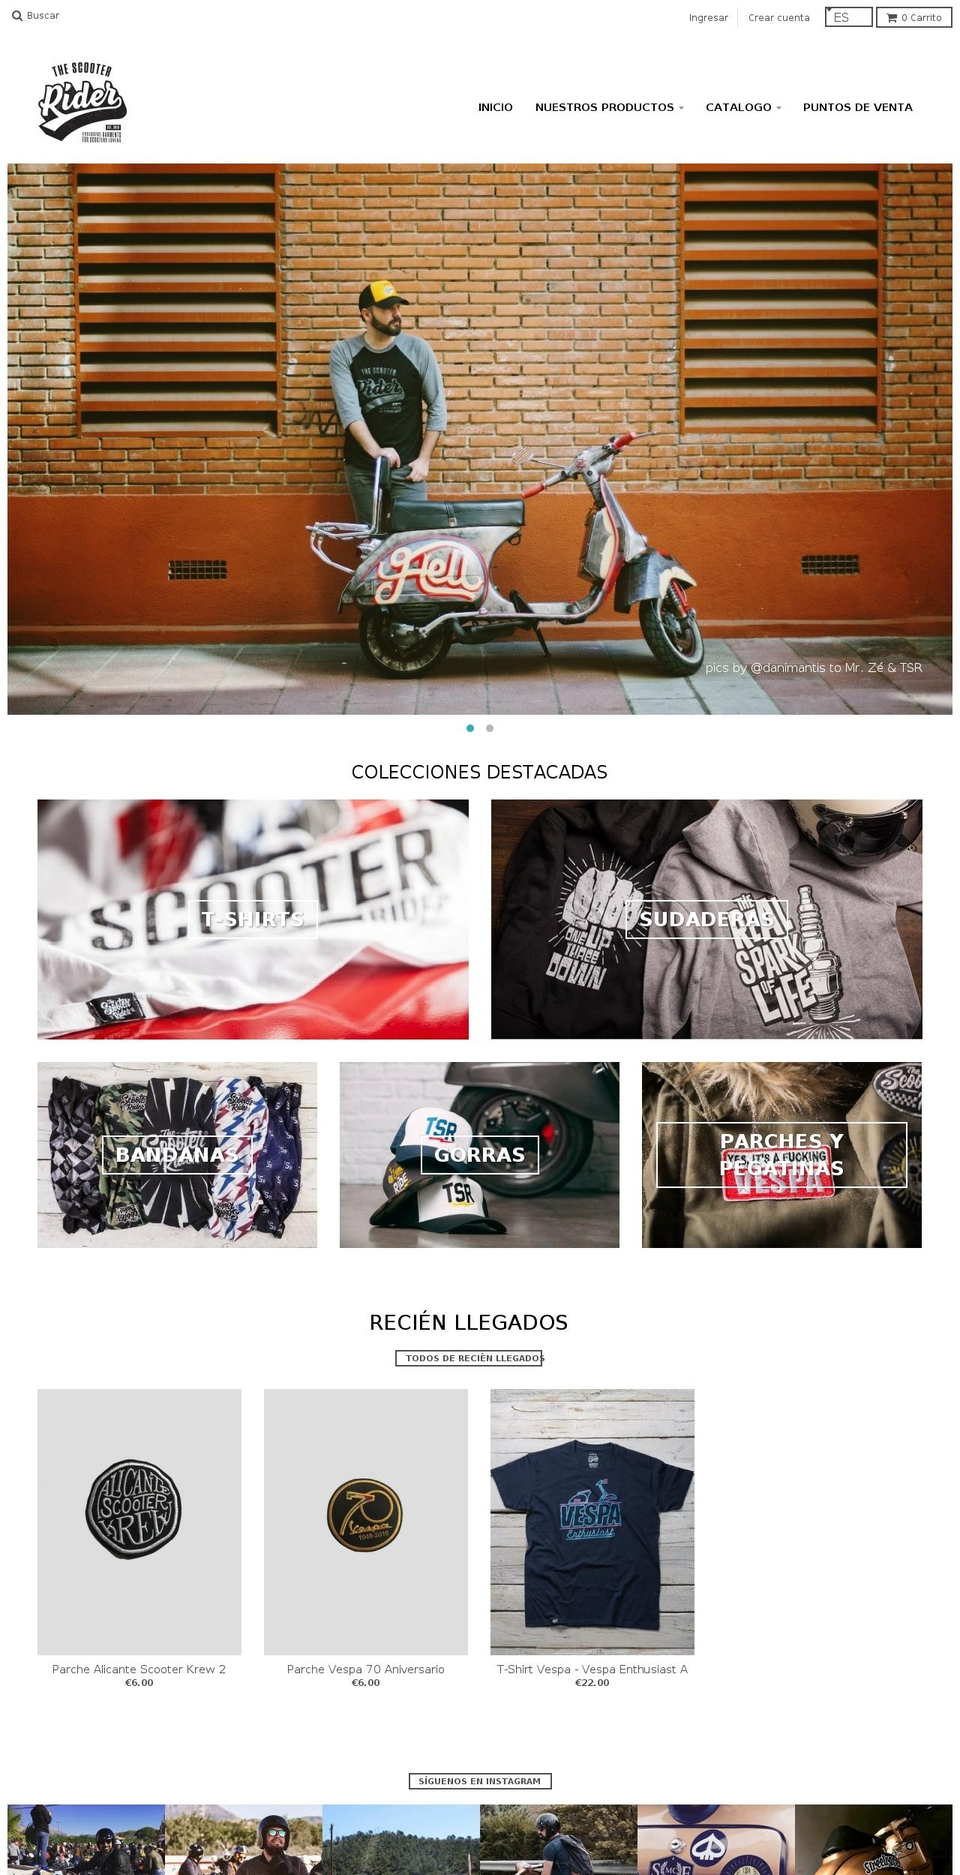 Venue Shopify theme site example thescooterider.com